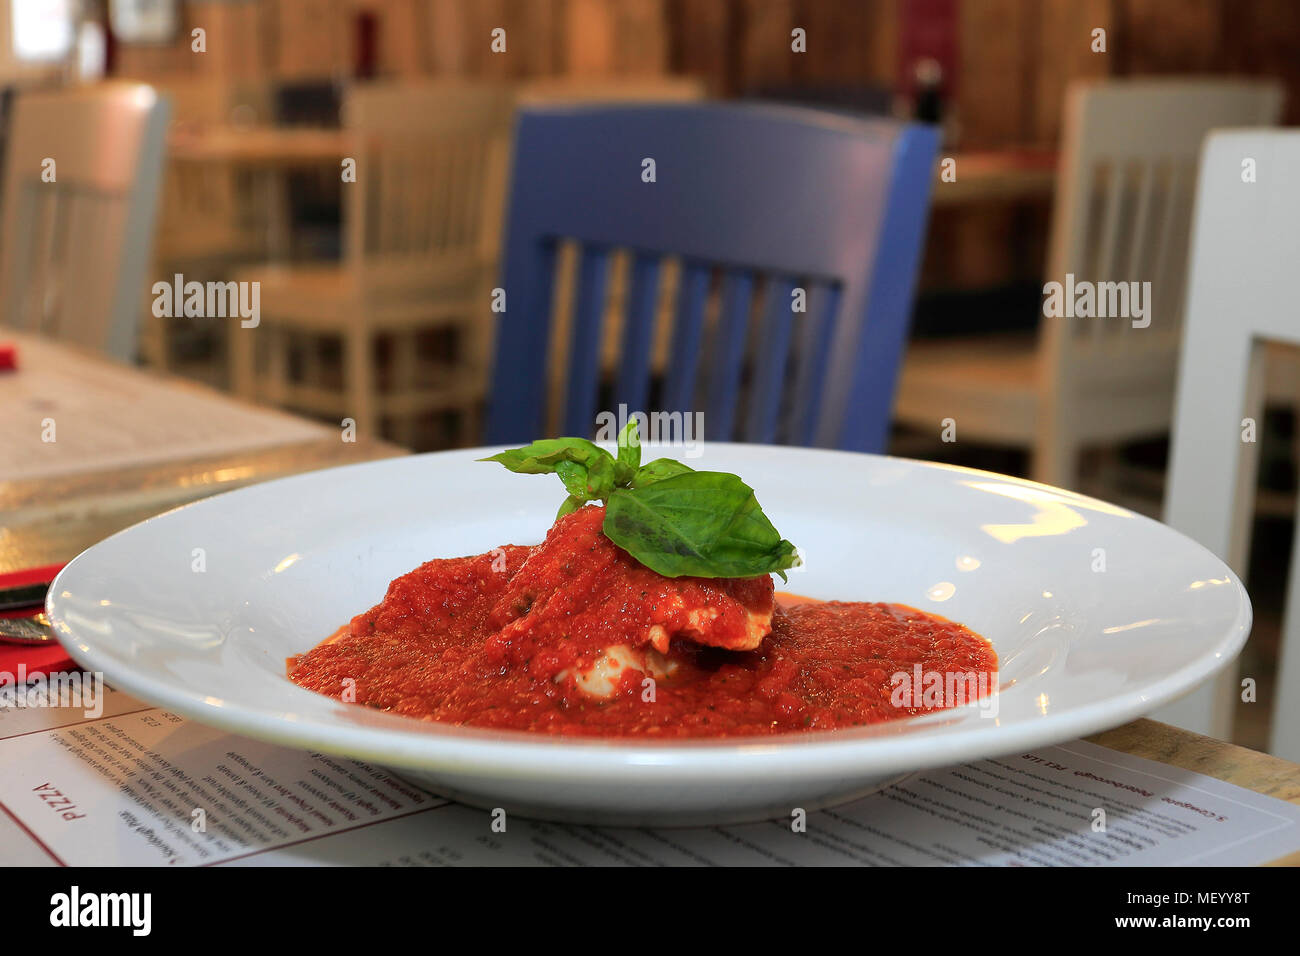 Sea Bass fillet in a cherry tomato sauce in a restaurant setting Stock Photo